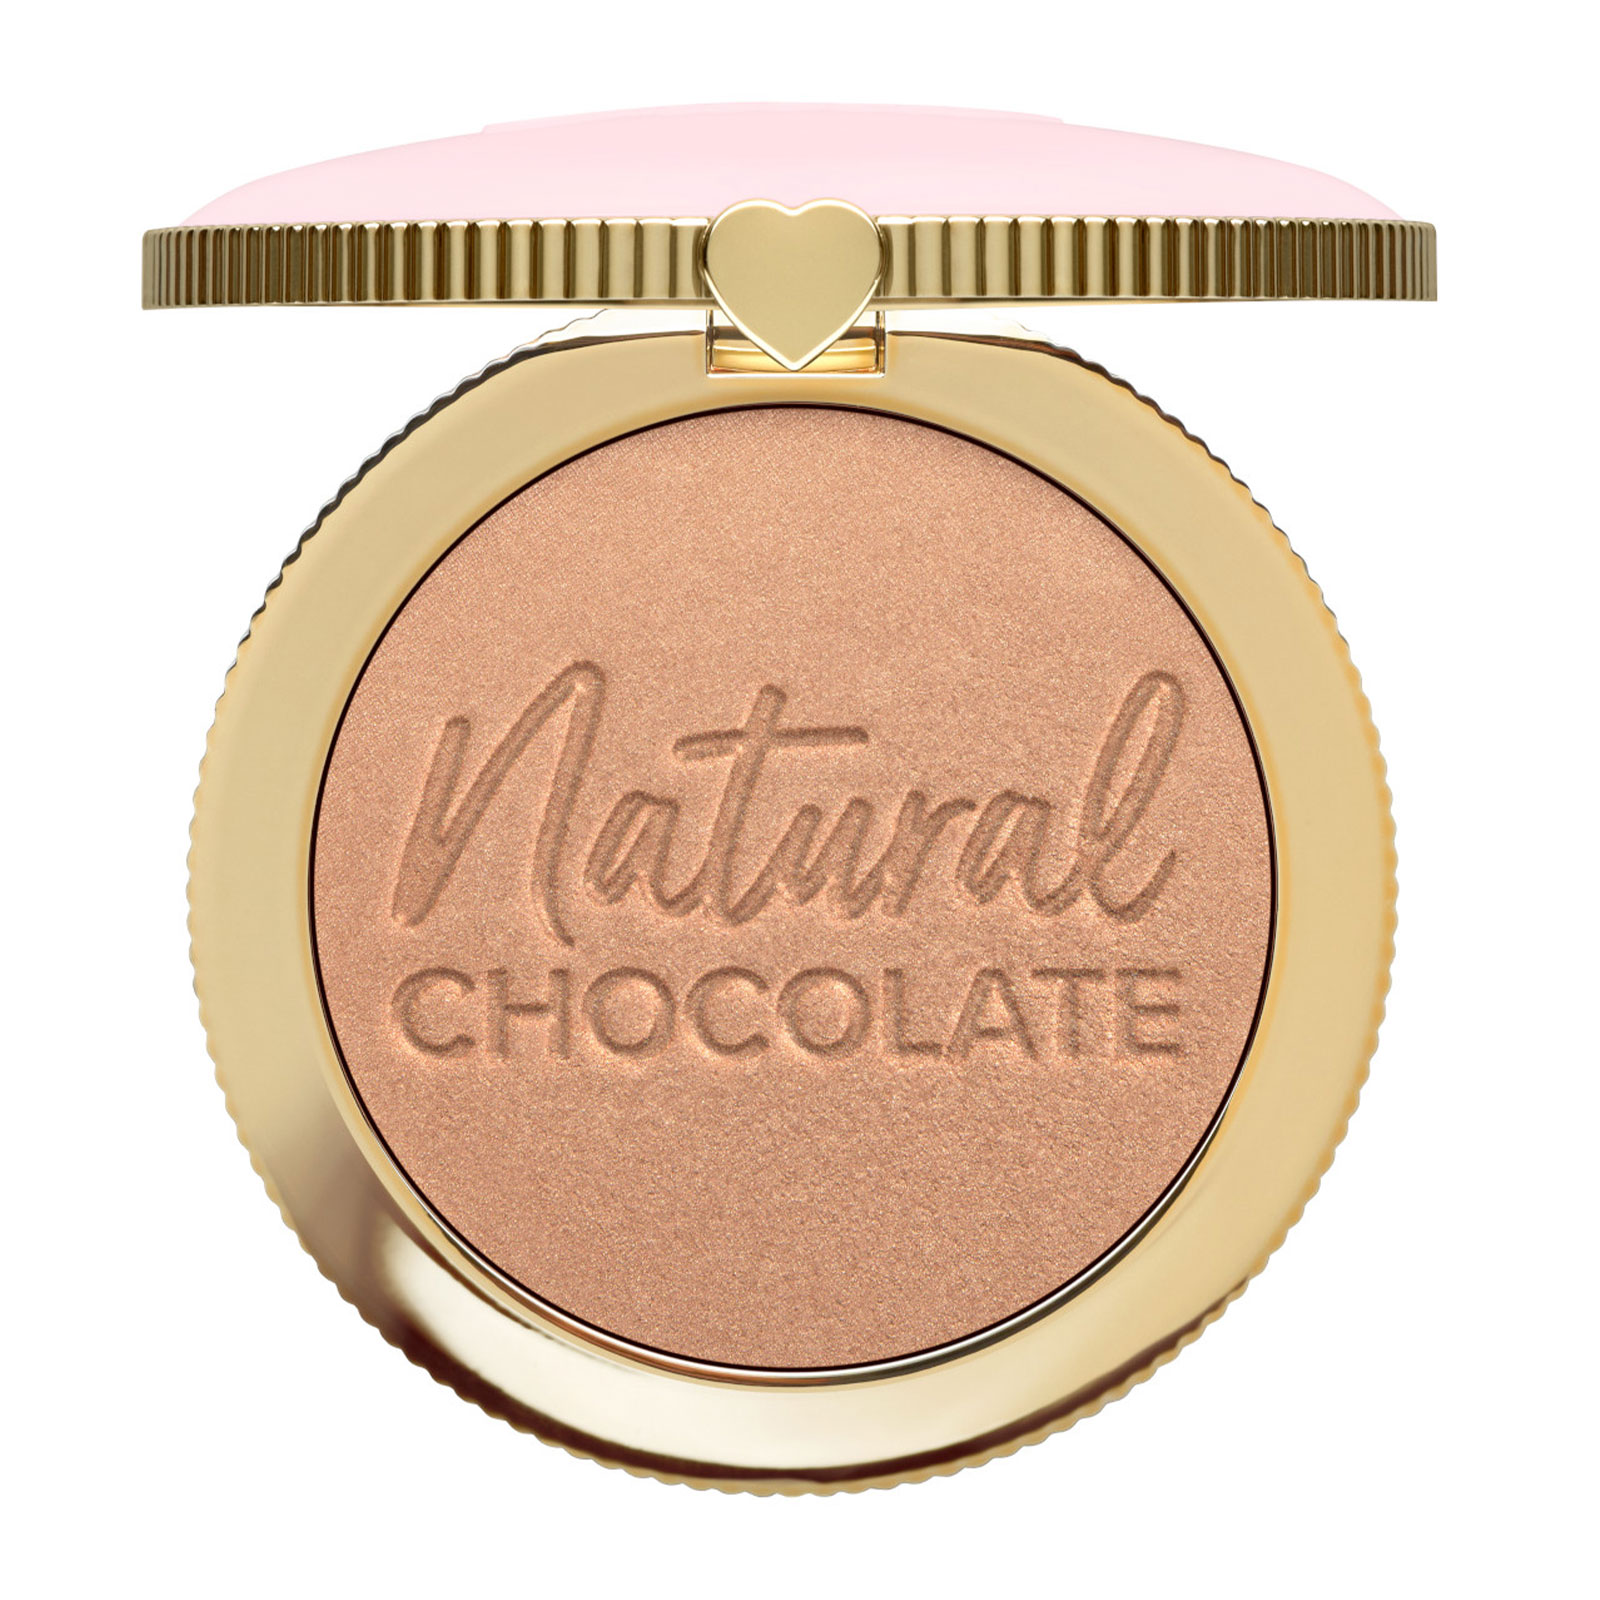 Too Faced Natural Chocolate Bronzer 9G Golden Cocoa